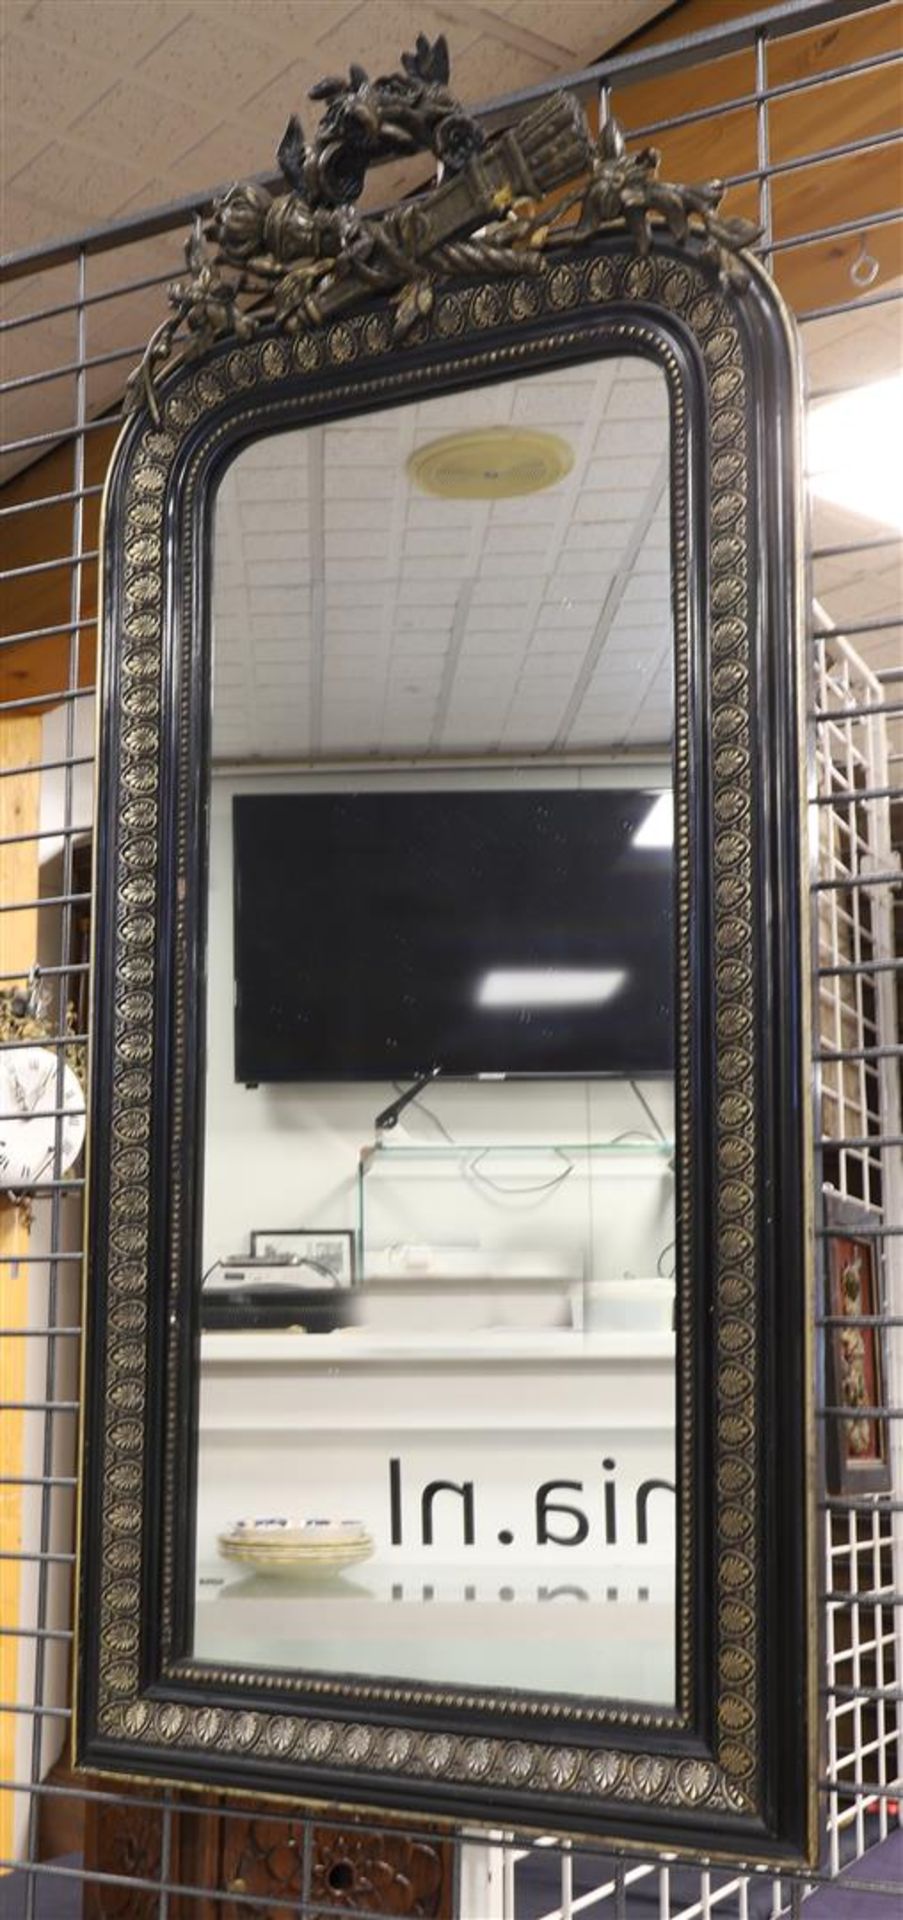 A rectangular mirror in a black ornamental frame and floral crown with, among other things, a